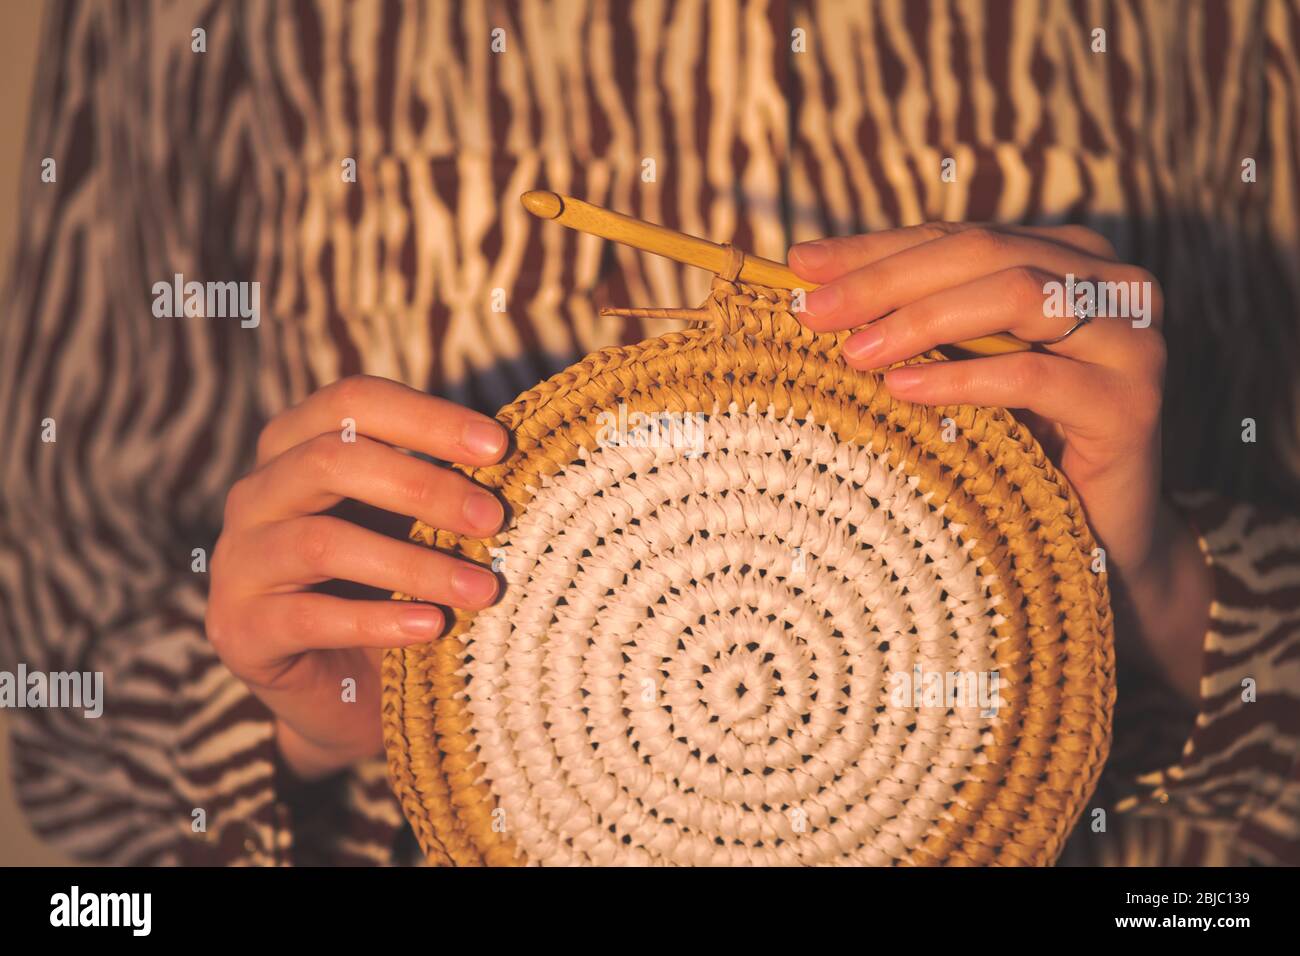 Round raffia crochet panno in female hands. Handcraft, hobby concept: holding a wall hanging and a crochet hook Stock Photo